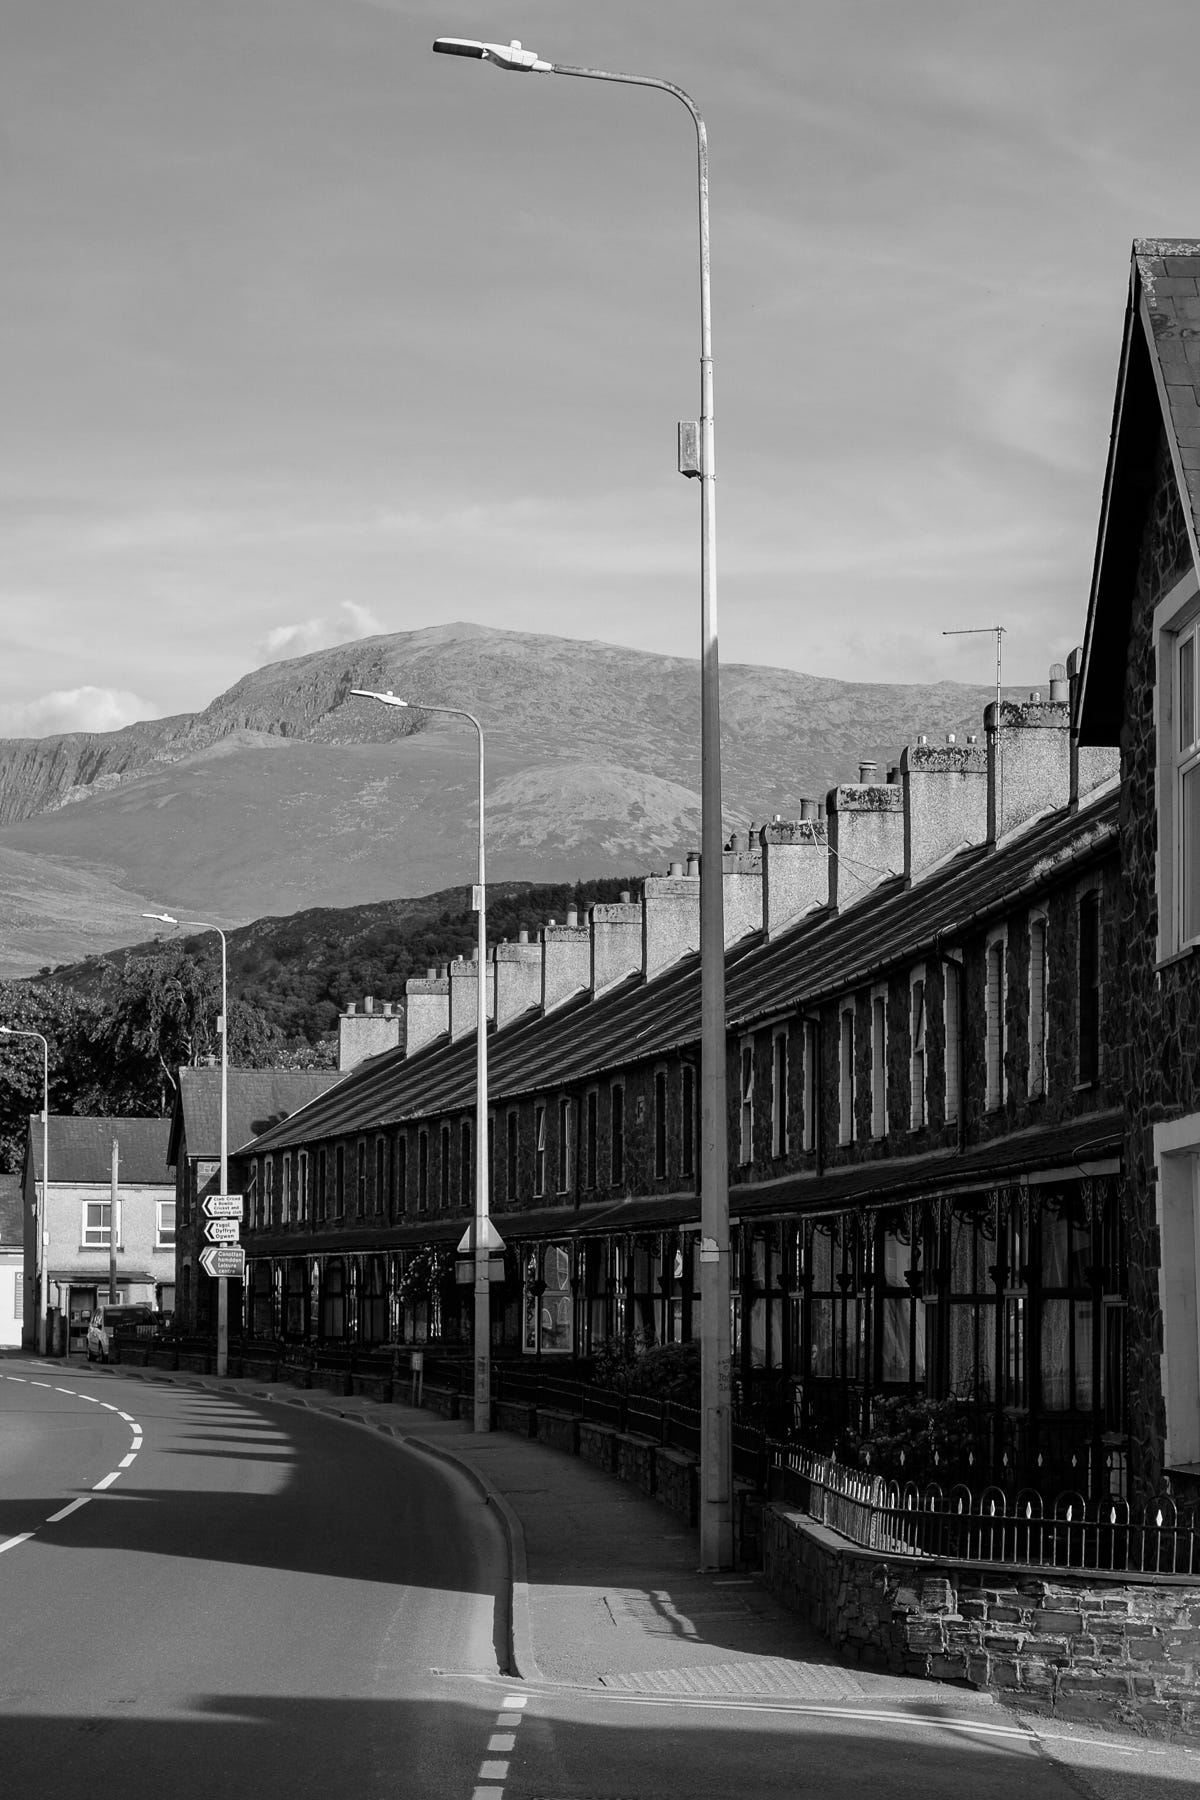 Black and white photograph of a row of terraced houses alongside a road with streetlights recedes into the distance towards a mountain.